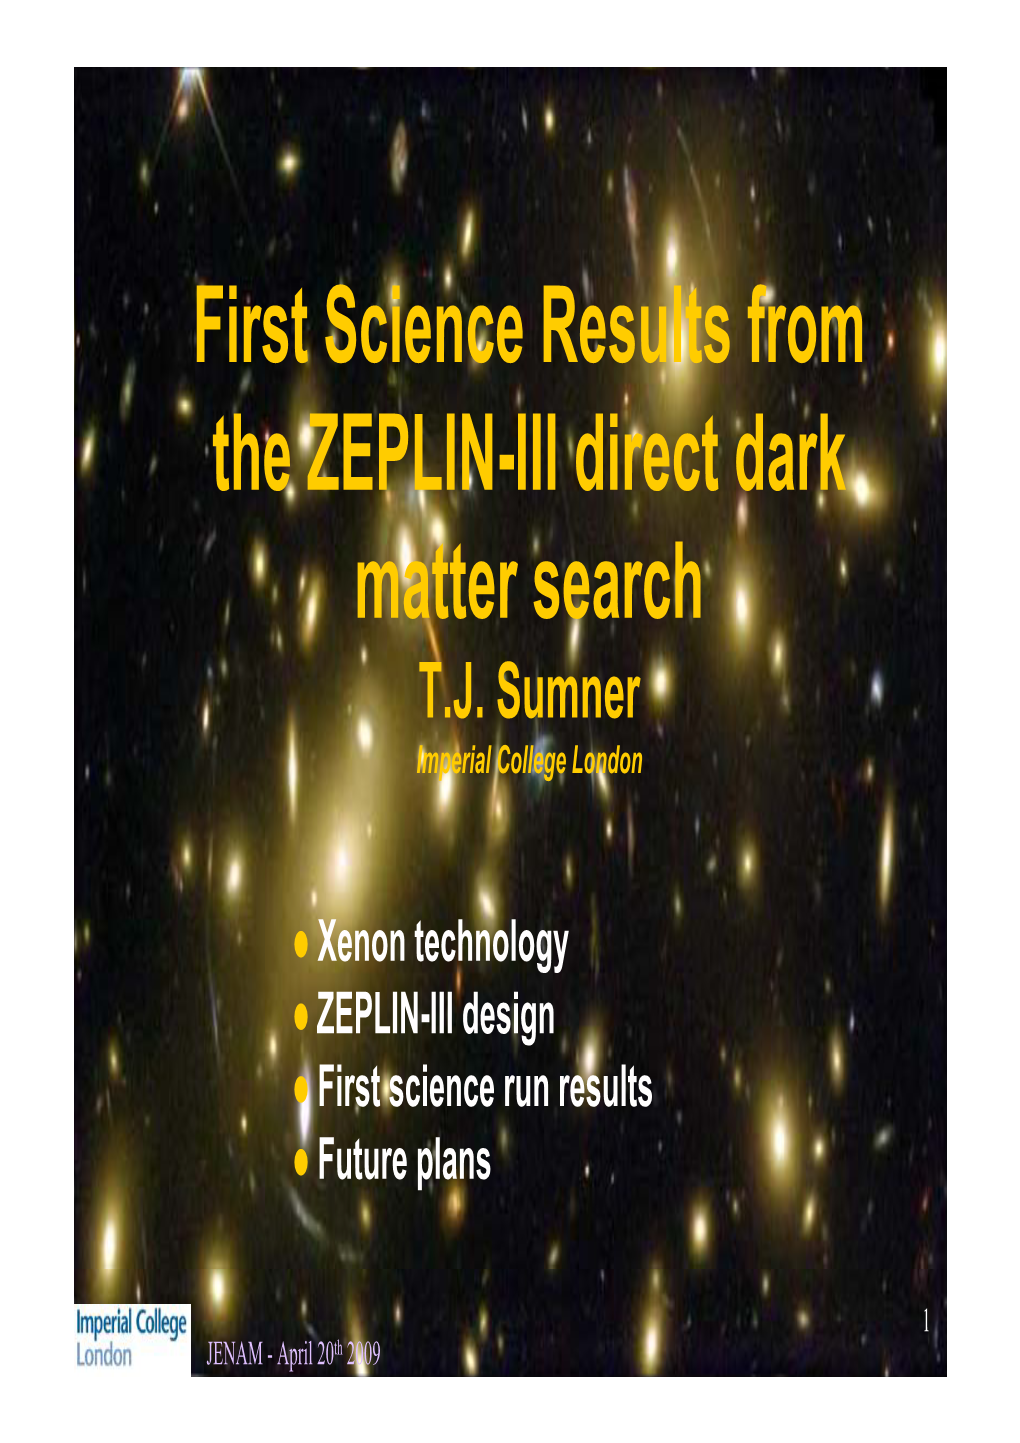 First Science Results from the ZEPLIN-III Direct Dark Matter Search T.J